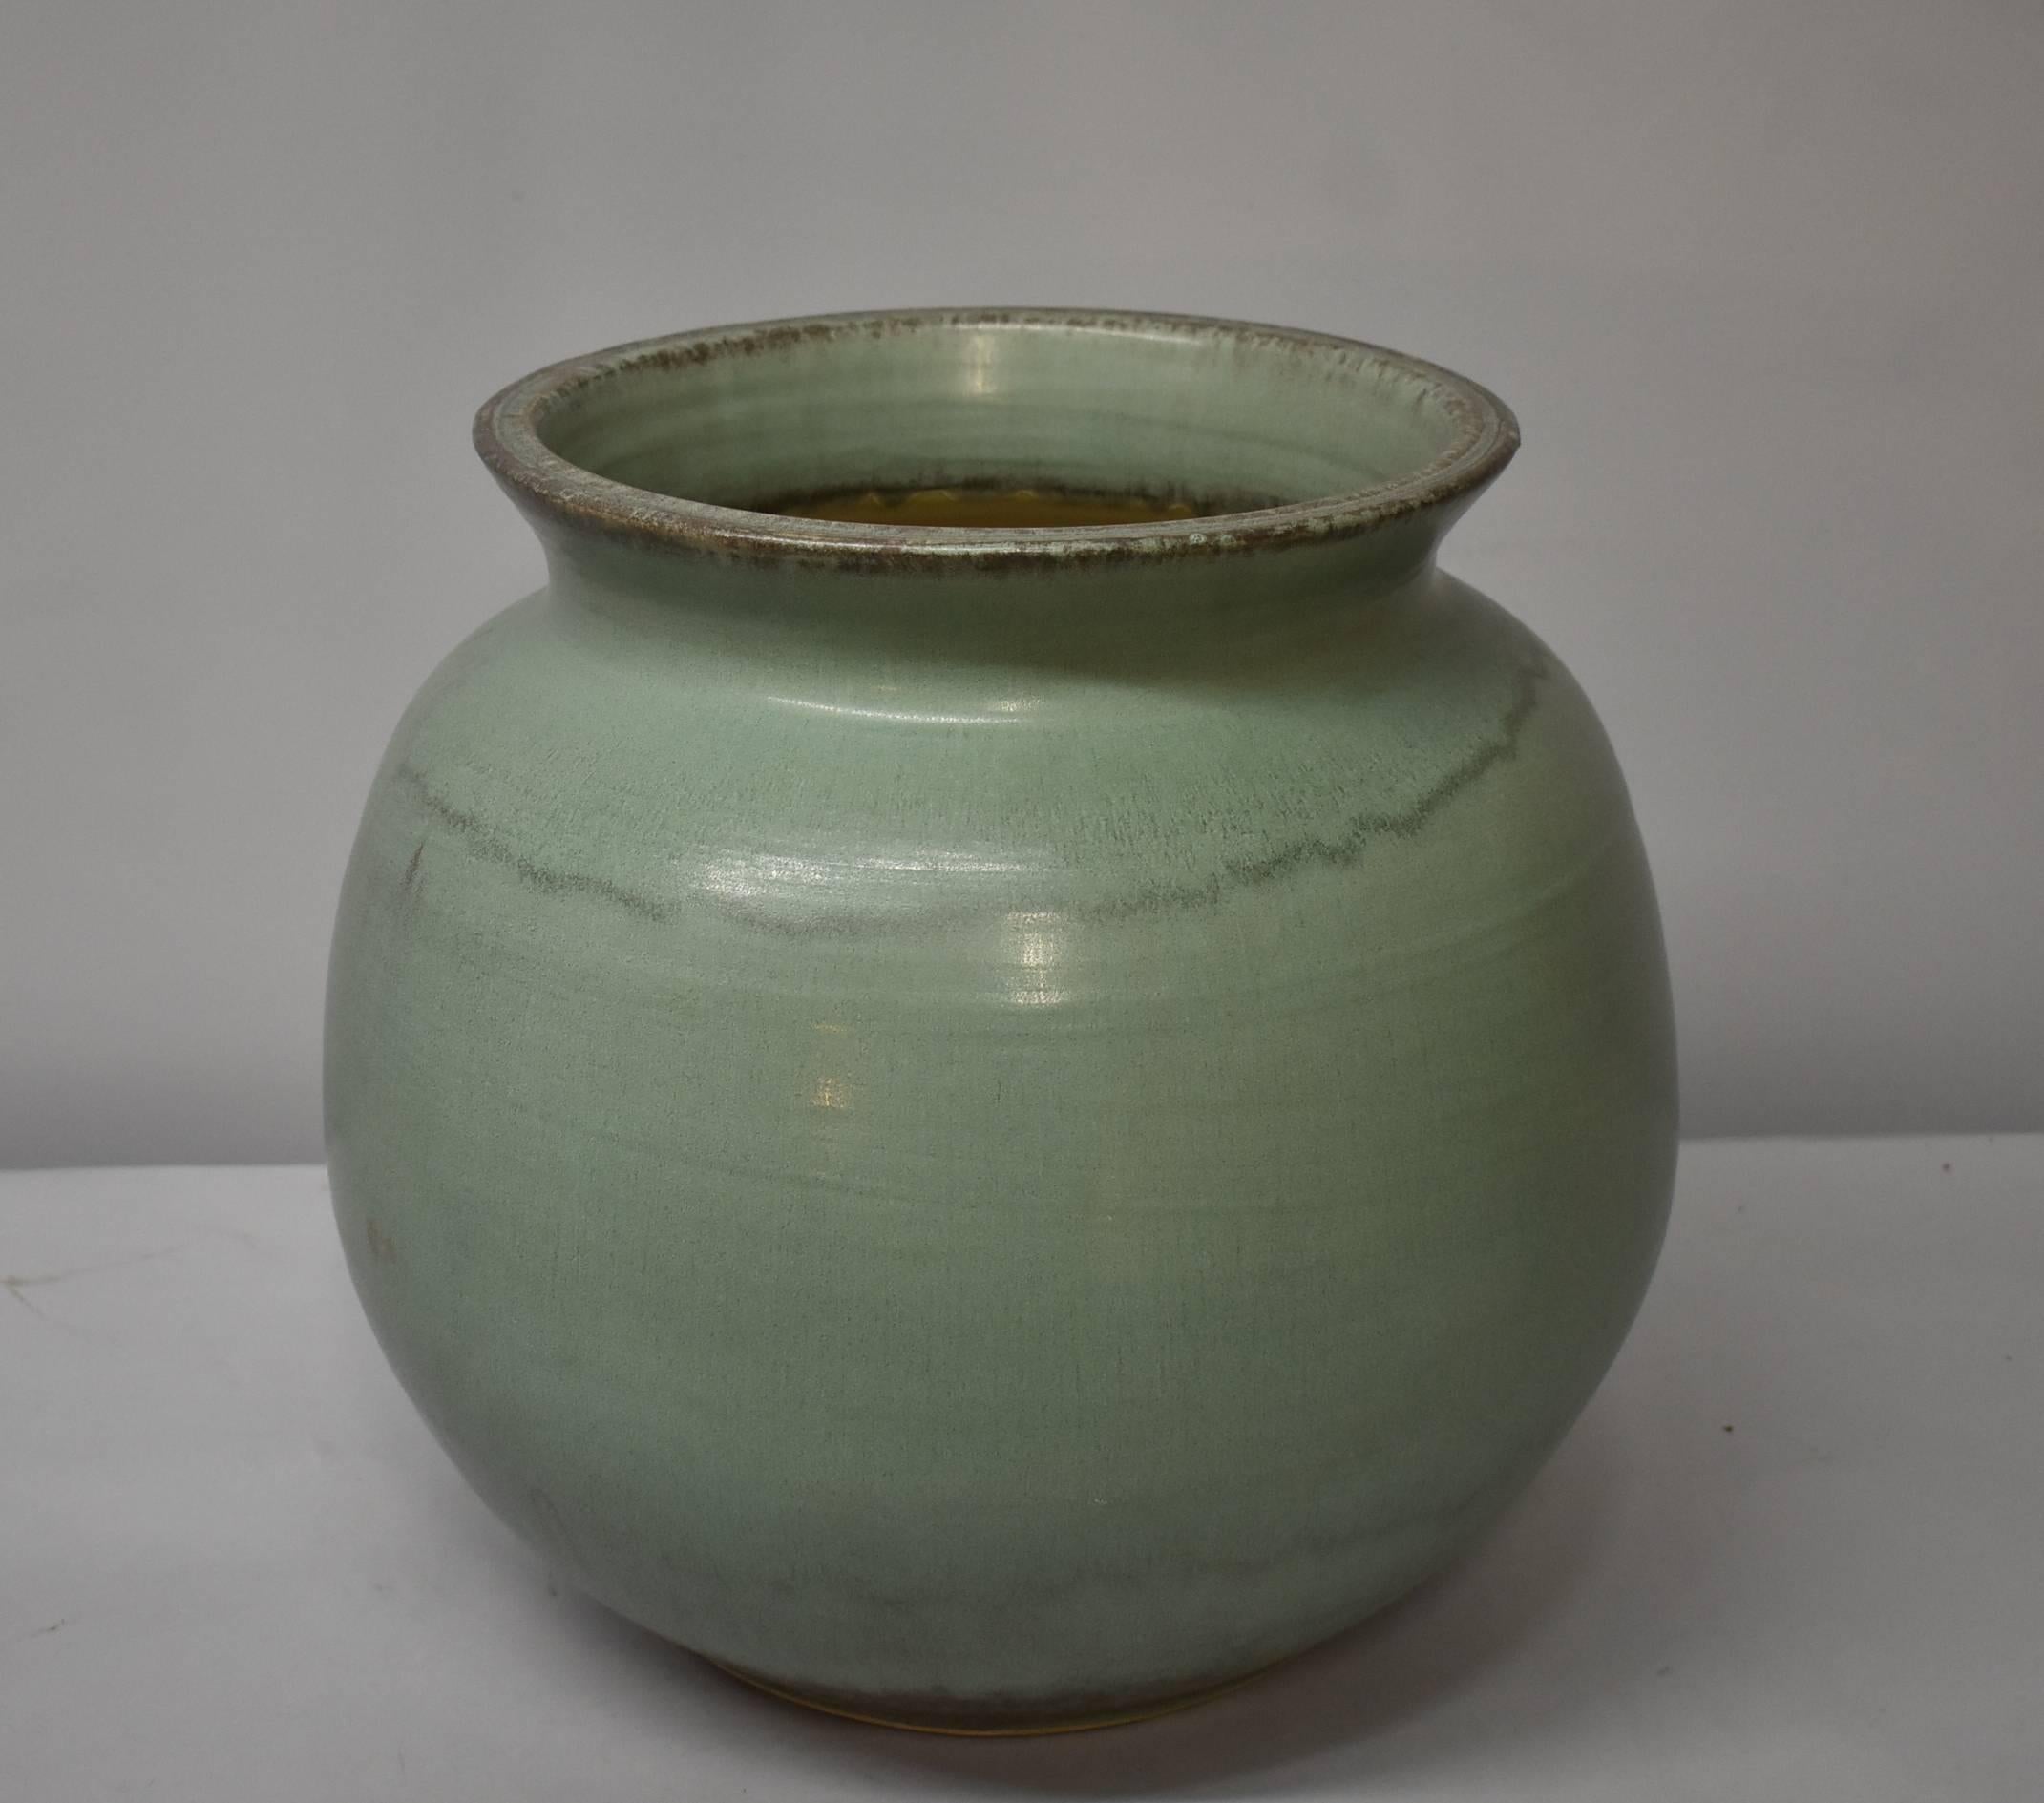 A large-scale vase by Pewabic Pottery of Detroit, MI and is done in a light jade green glaze. Marked on the bottom with impressed Pewabic Pottery and the year 2012. Very good condition, no chips or cracks noted. Dimensions: 14